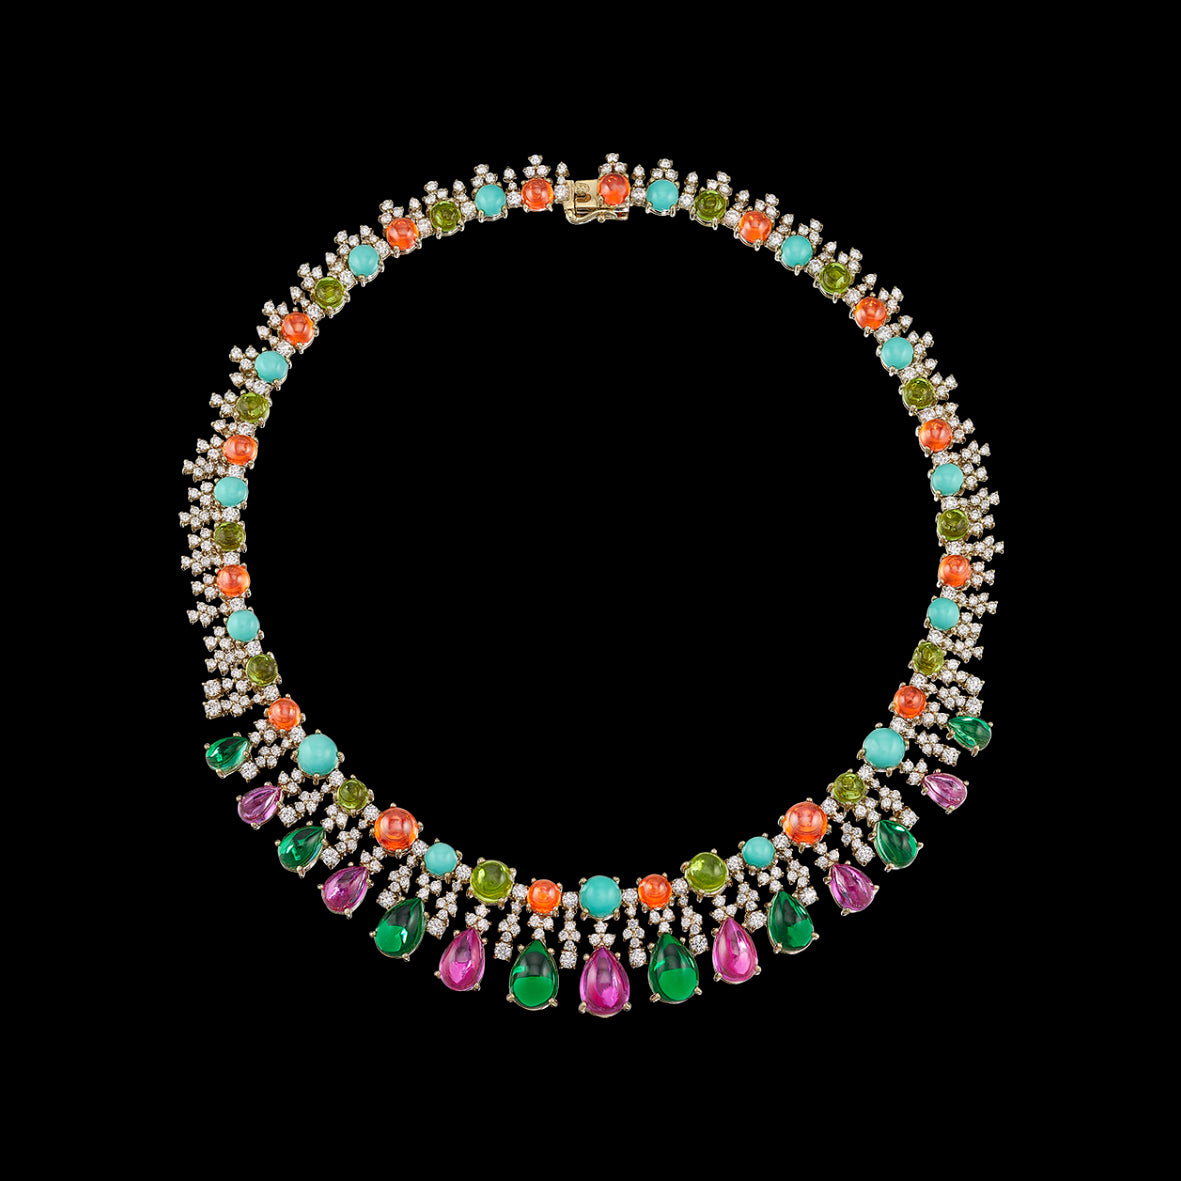 Rainbow Tutti Frutti Necklace, Necklace, Anabela Chan Joaillerie - Fine jewelry with laboratory grown and created gemstones hand-crafted in the United Kingdom. Anabela Chan Joaillerie is the first fine jewellery brand in the world to champion laboratory-grown and created gemstones with high jewellery design, artisanal craftsmanship and a focus on ethical and sustainable innovations.